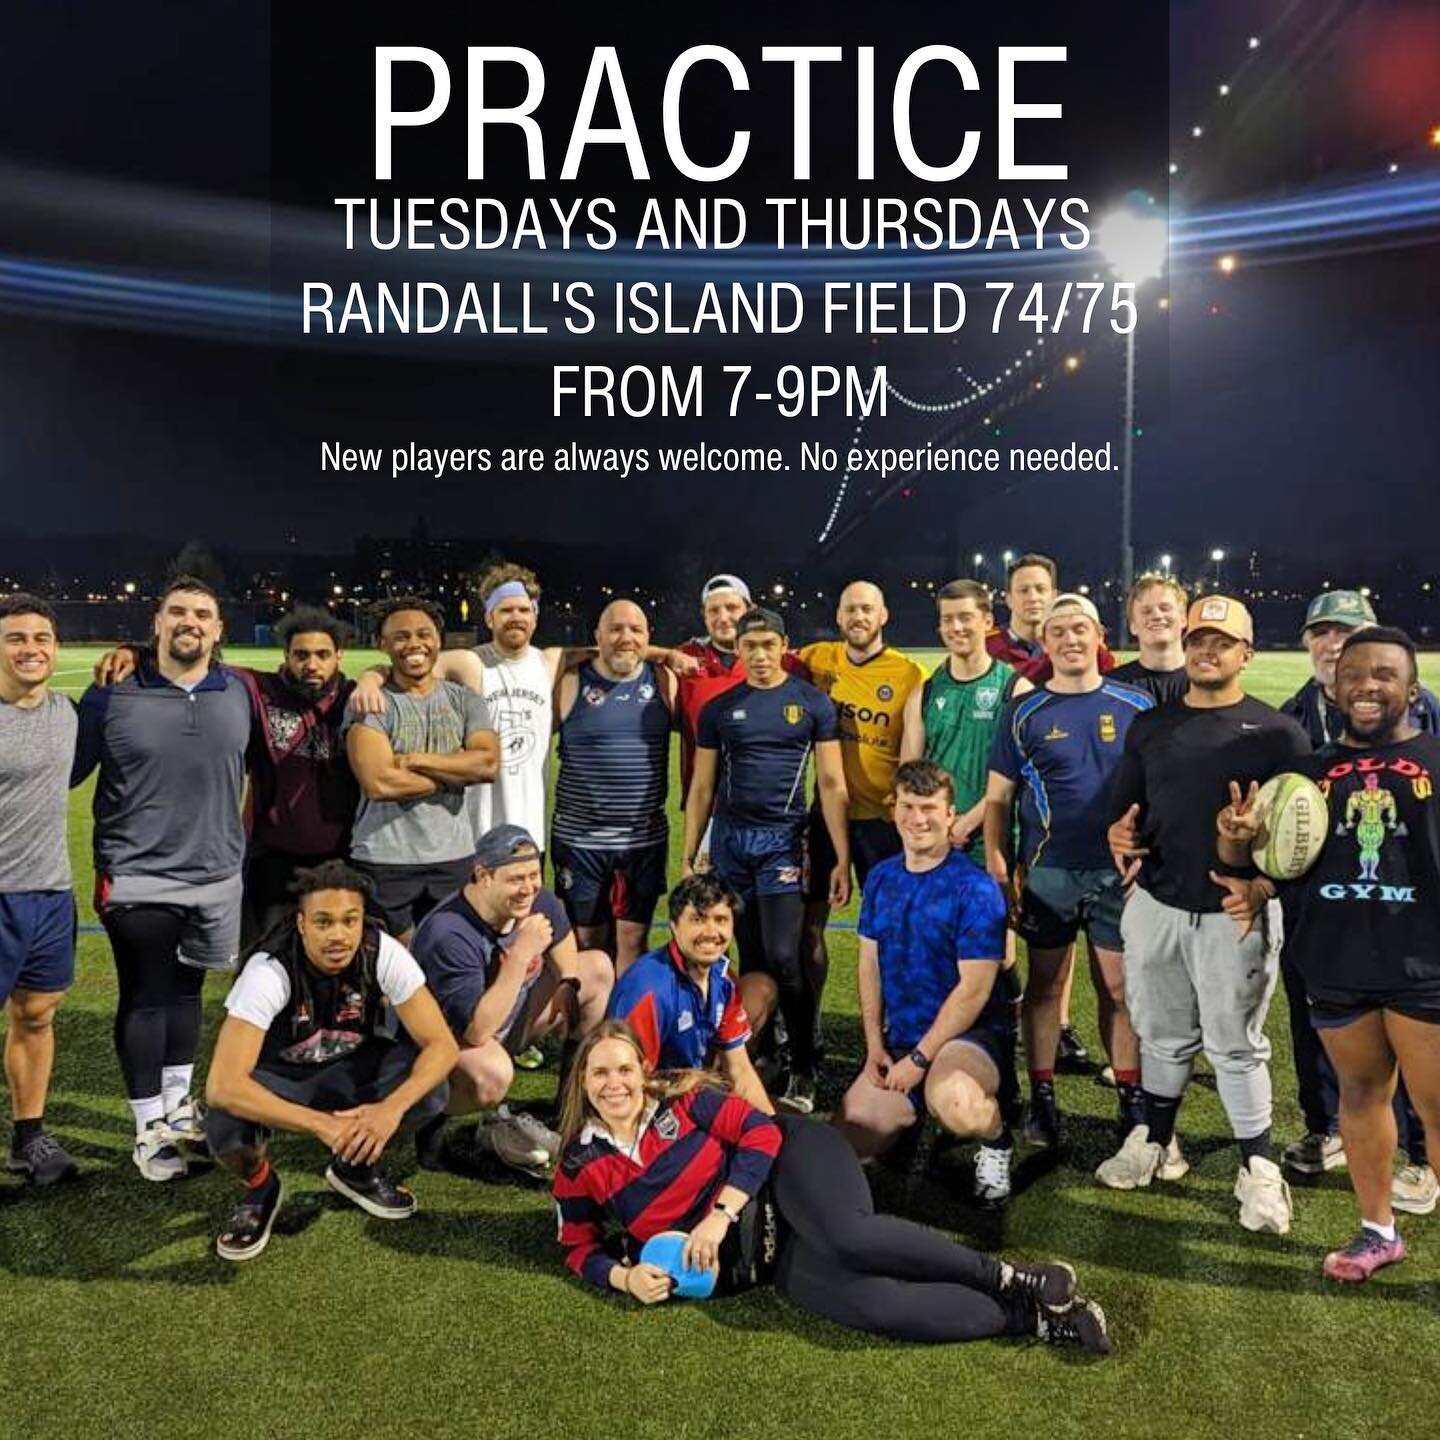 Tonight! Practice every Tuesdays and Thursdays for both teams! No experience needed. New players are always welcome!
#nycrugby #rugby